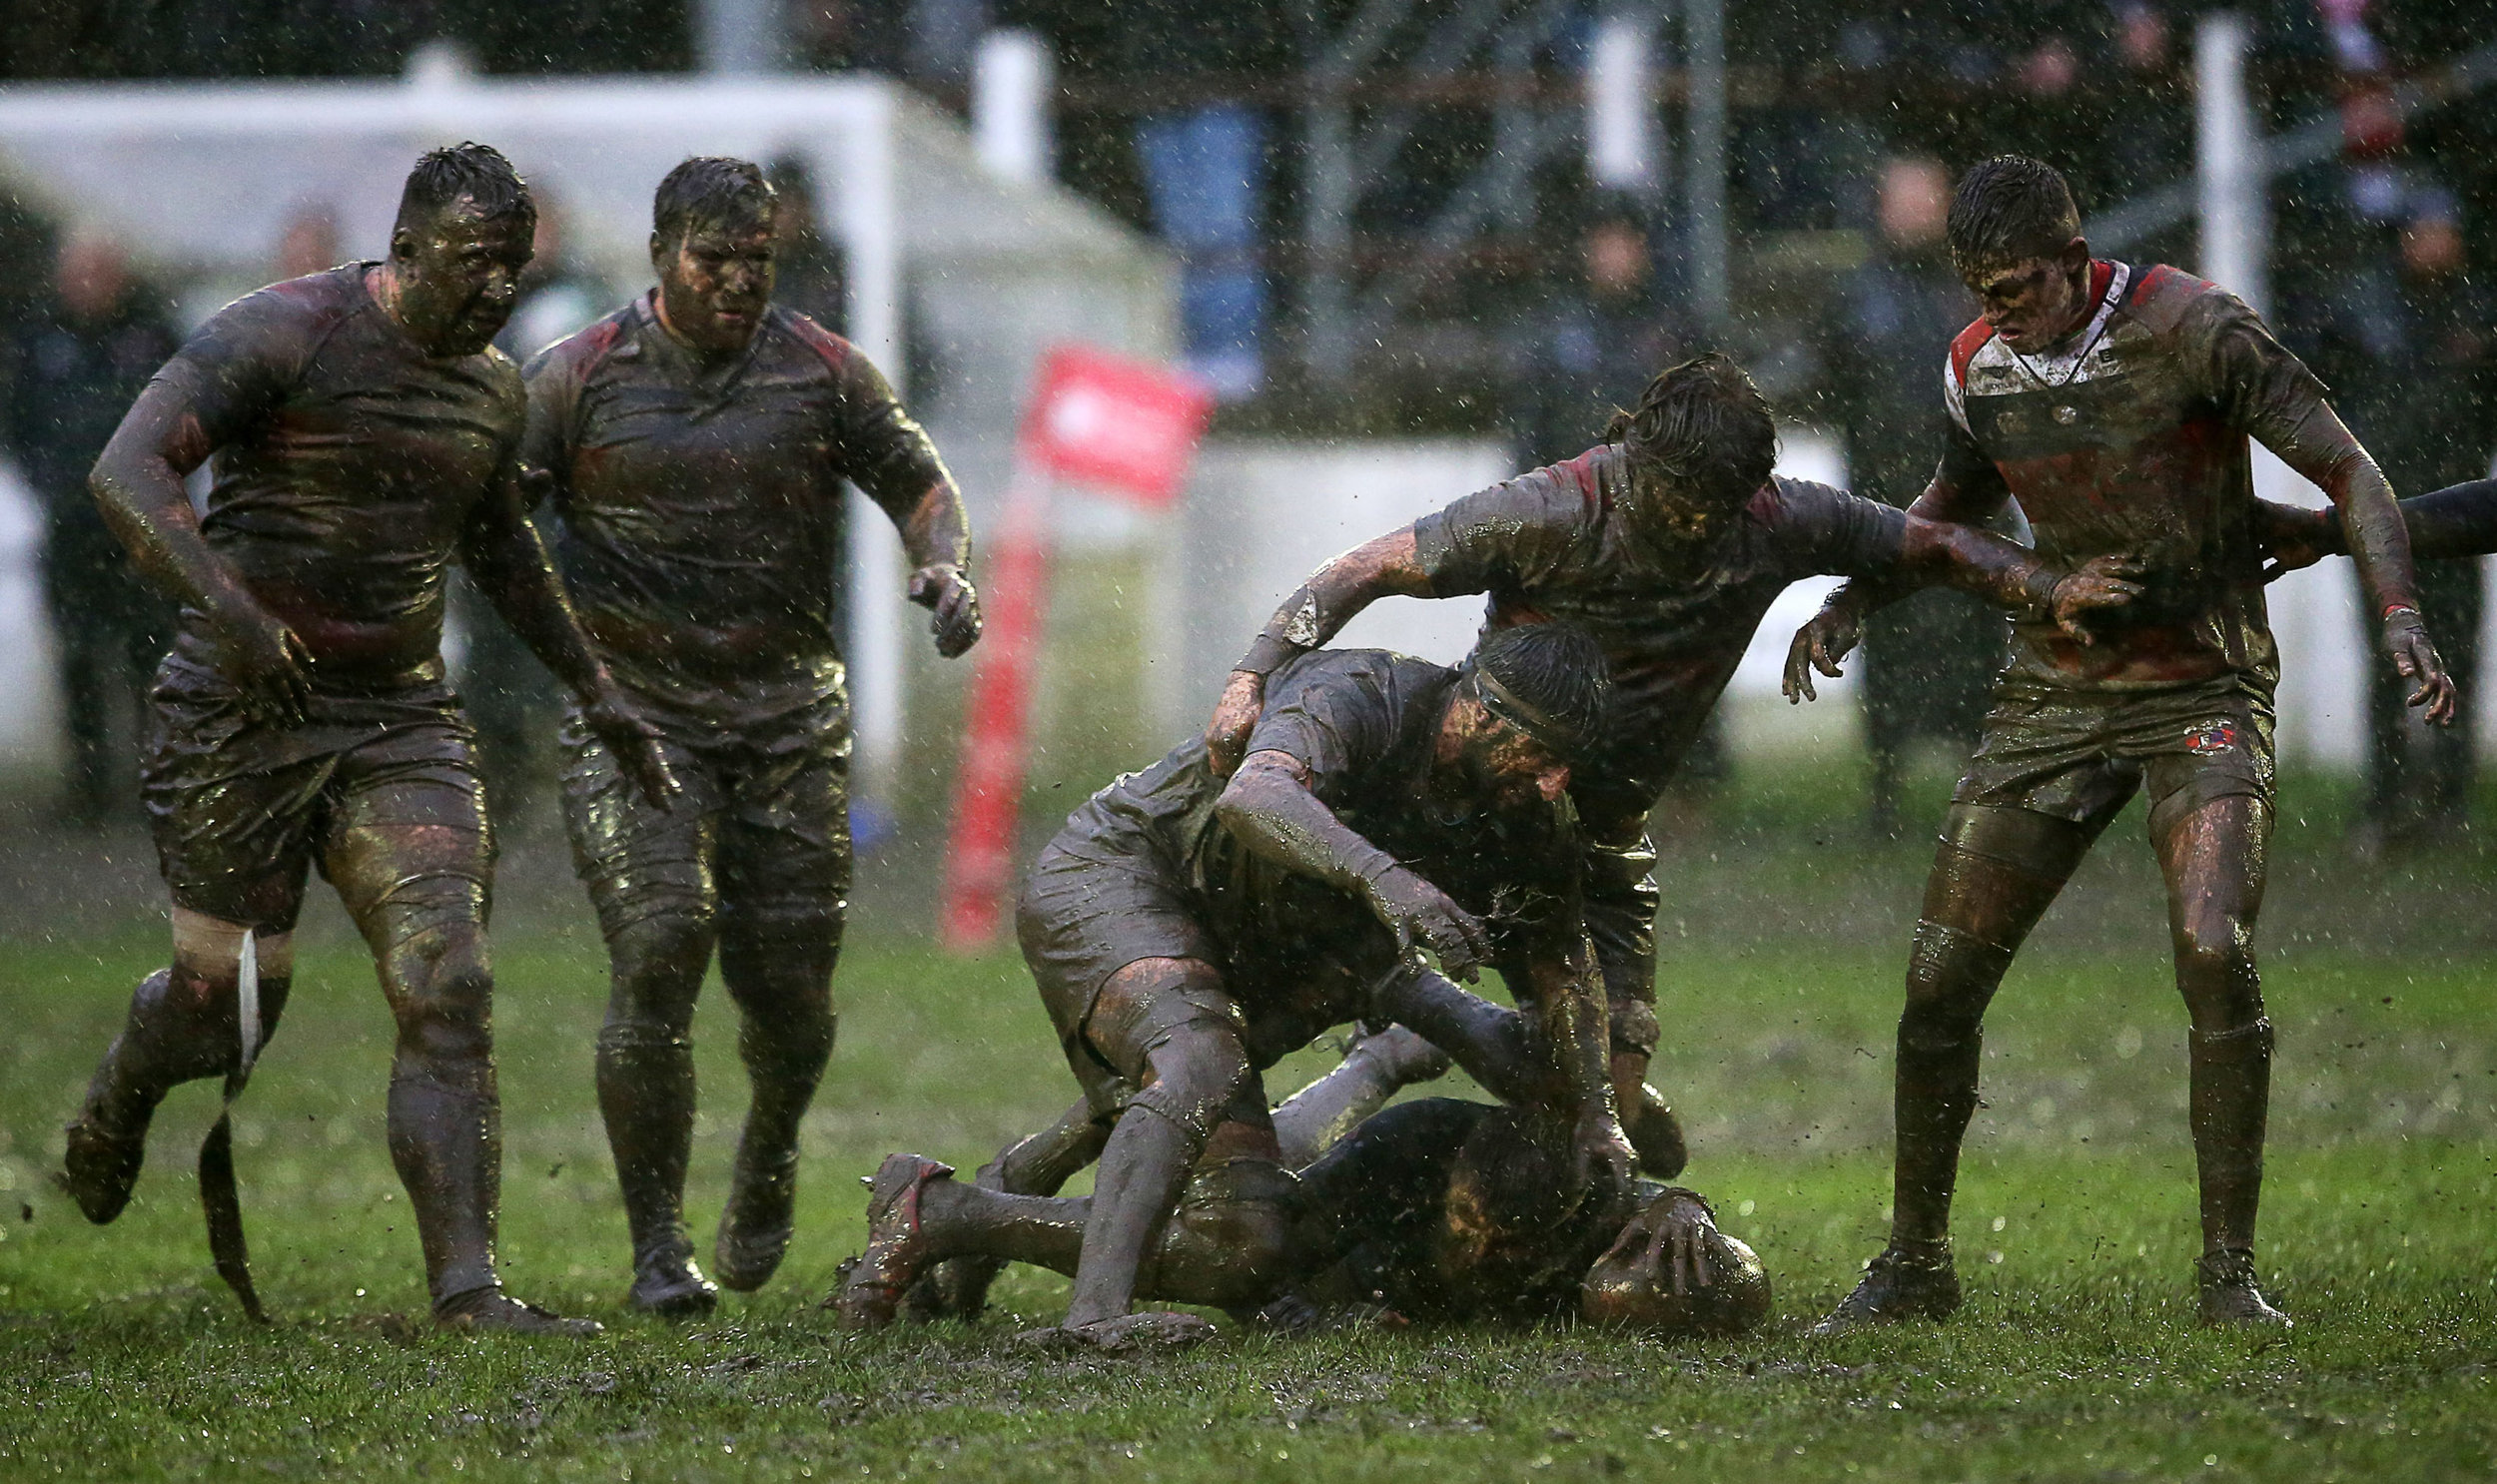  Players wrestle for the ball in muddy conditions during a WRU National Cup Rugby match between Cross Keys and Pontypool at Pandy Park, Swansea.
Photo by Chris Fairweather, 26 January 2019
 